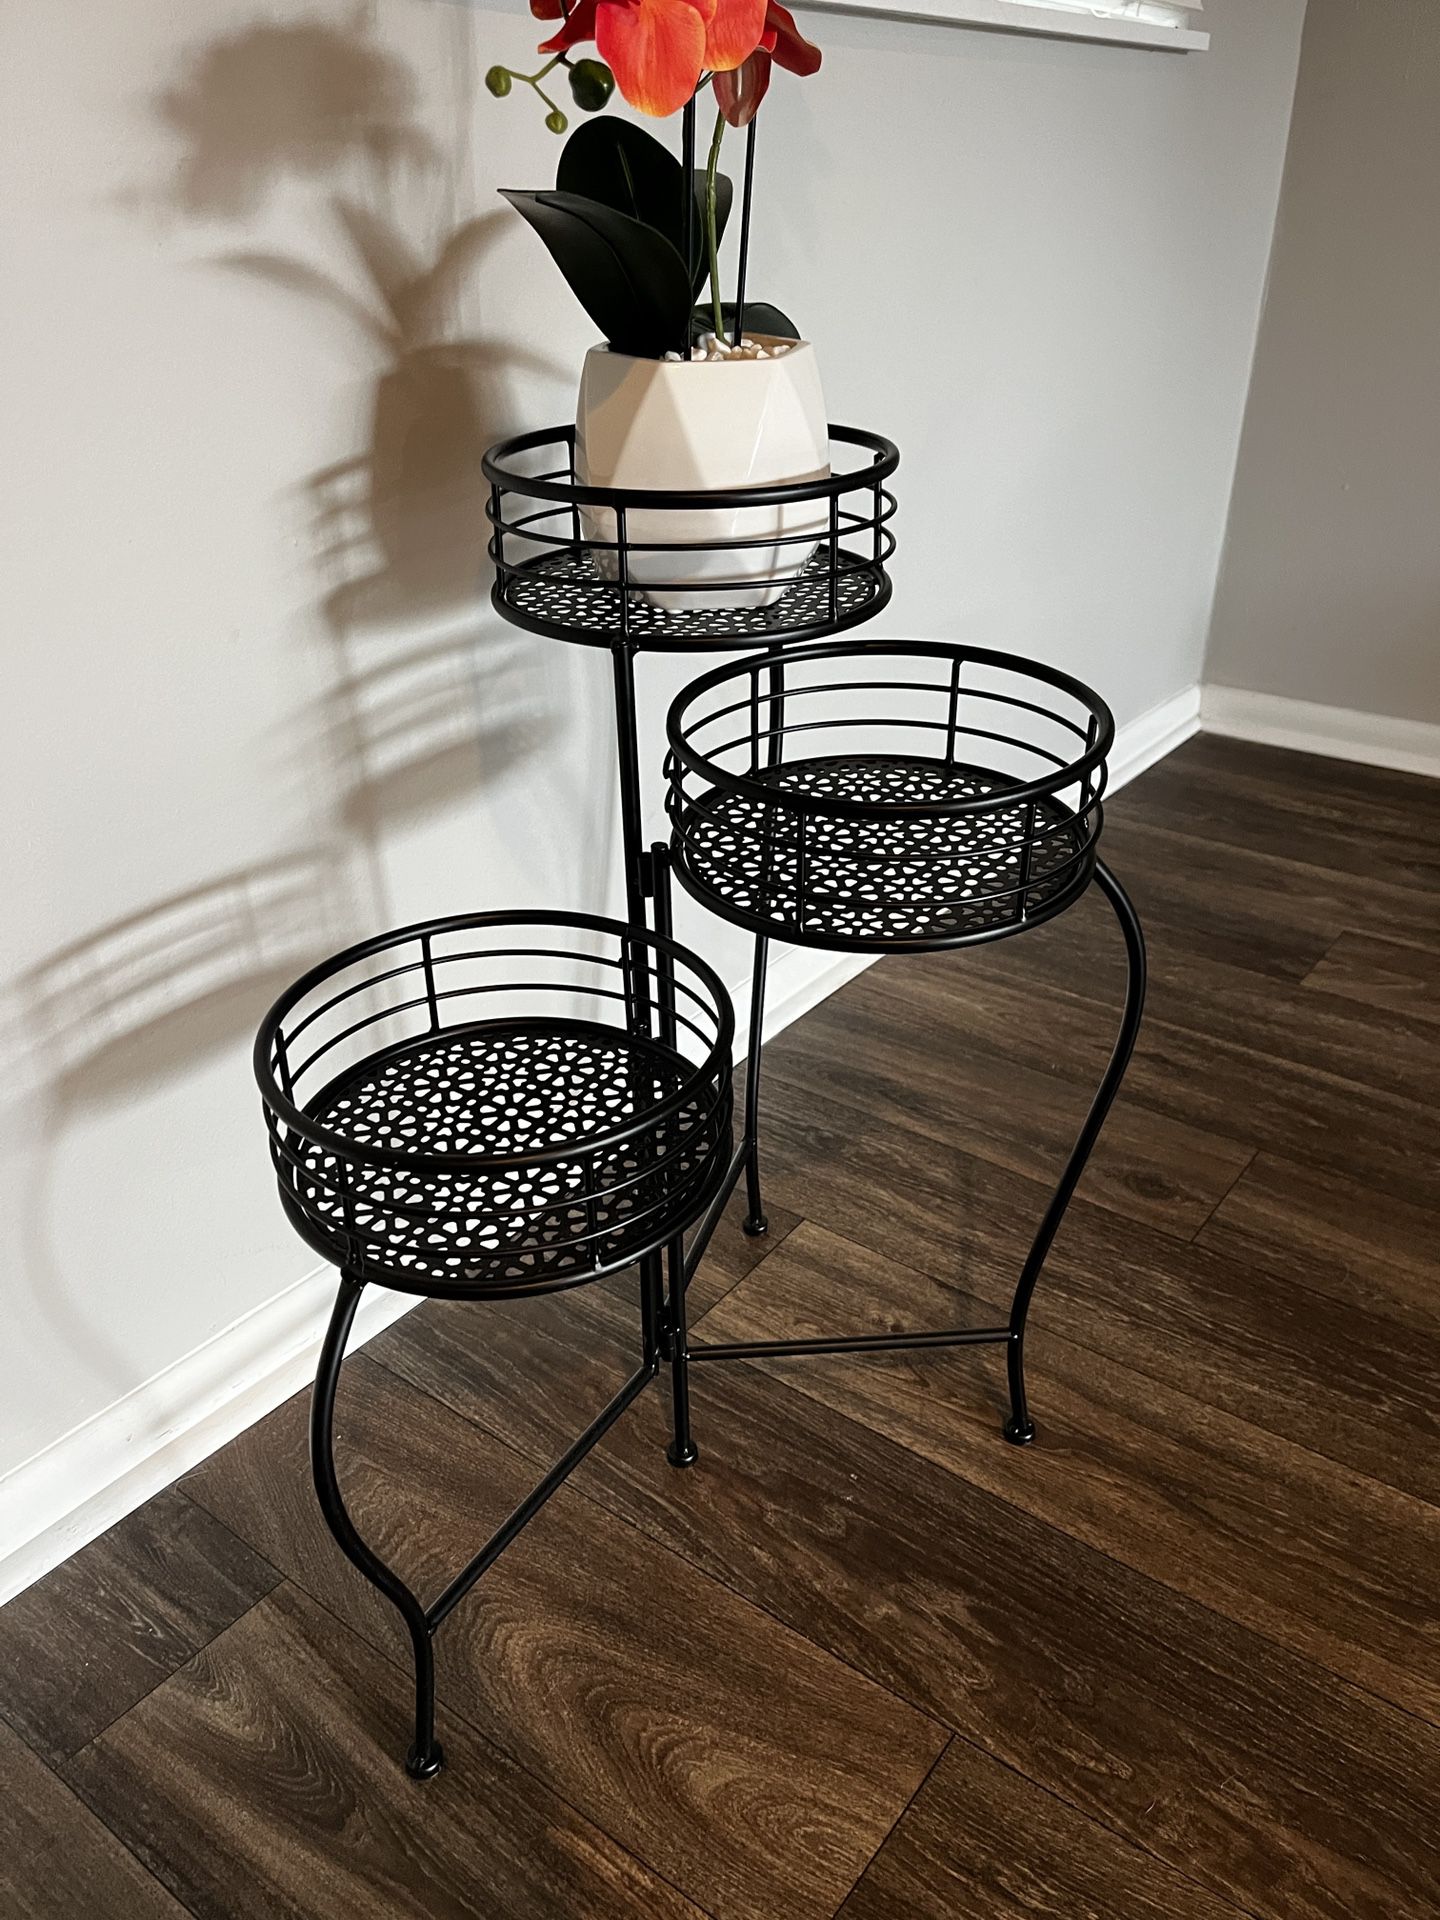 3 Tier Plant Stand, Pots, Metal Decorative Gardening Stand 